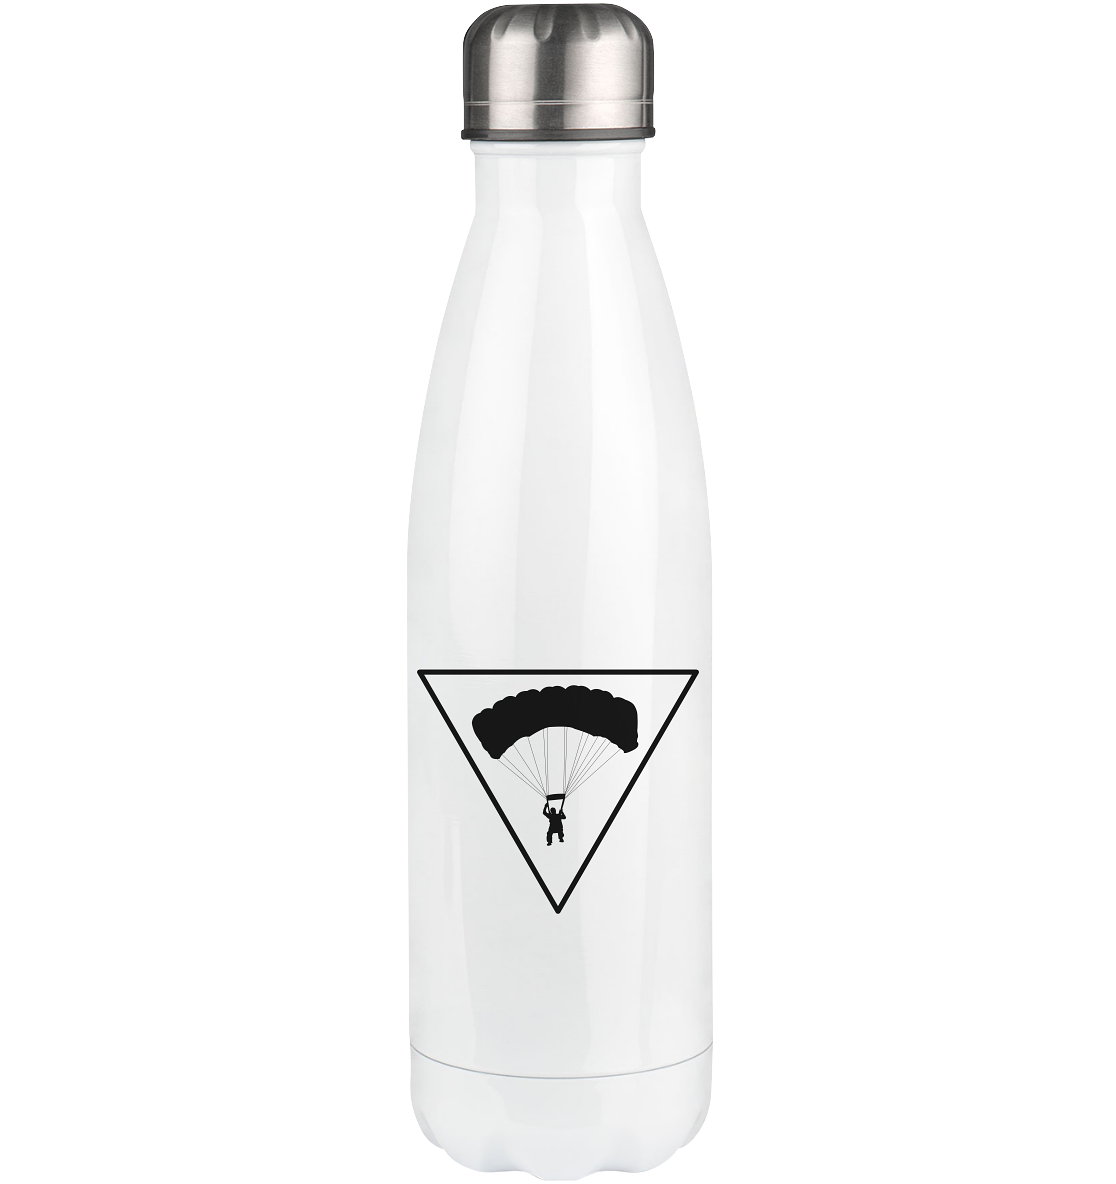 Triangle and Paragliding - Edelstahl Thermosflasche berge 500ml